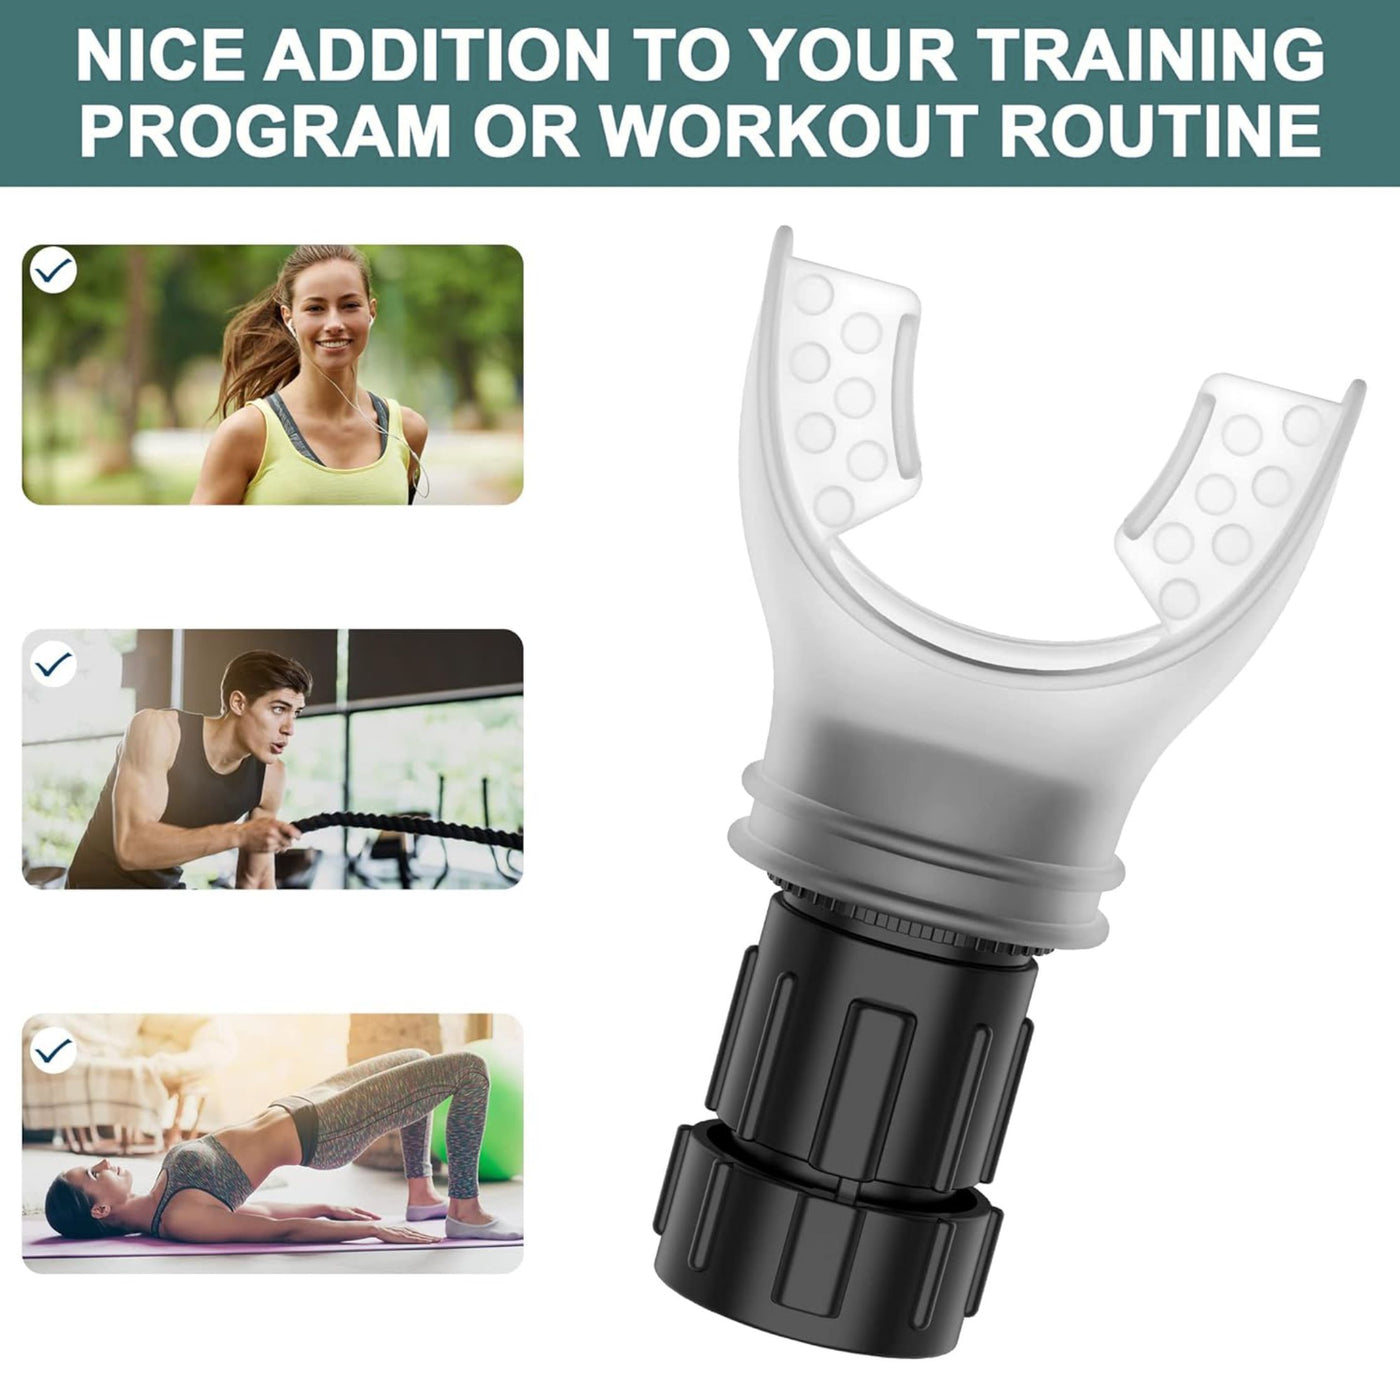 AirVantage BreathBooster Nice addition to your training program or workout routine